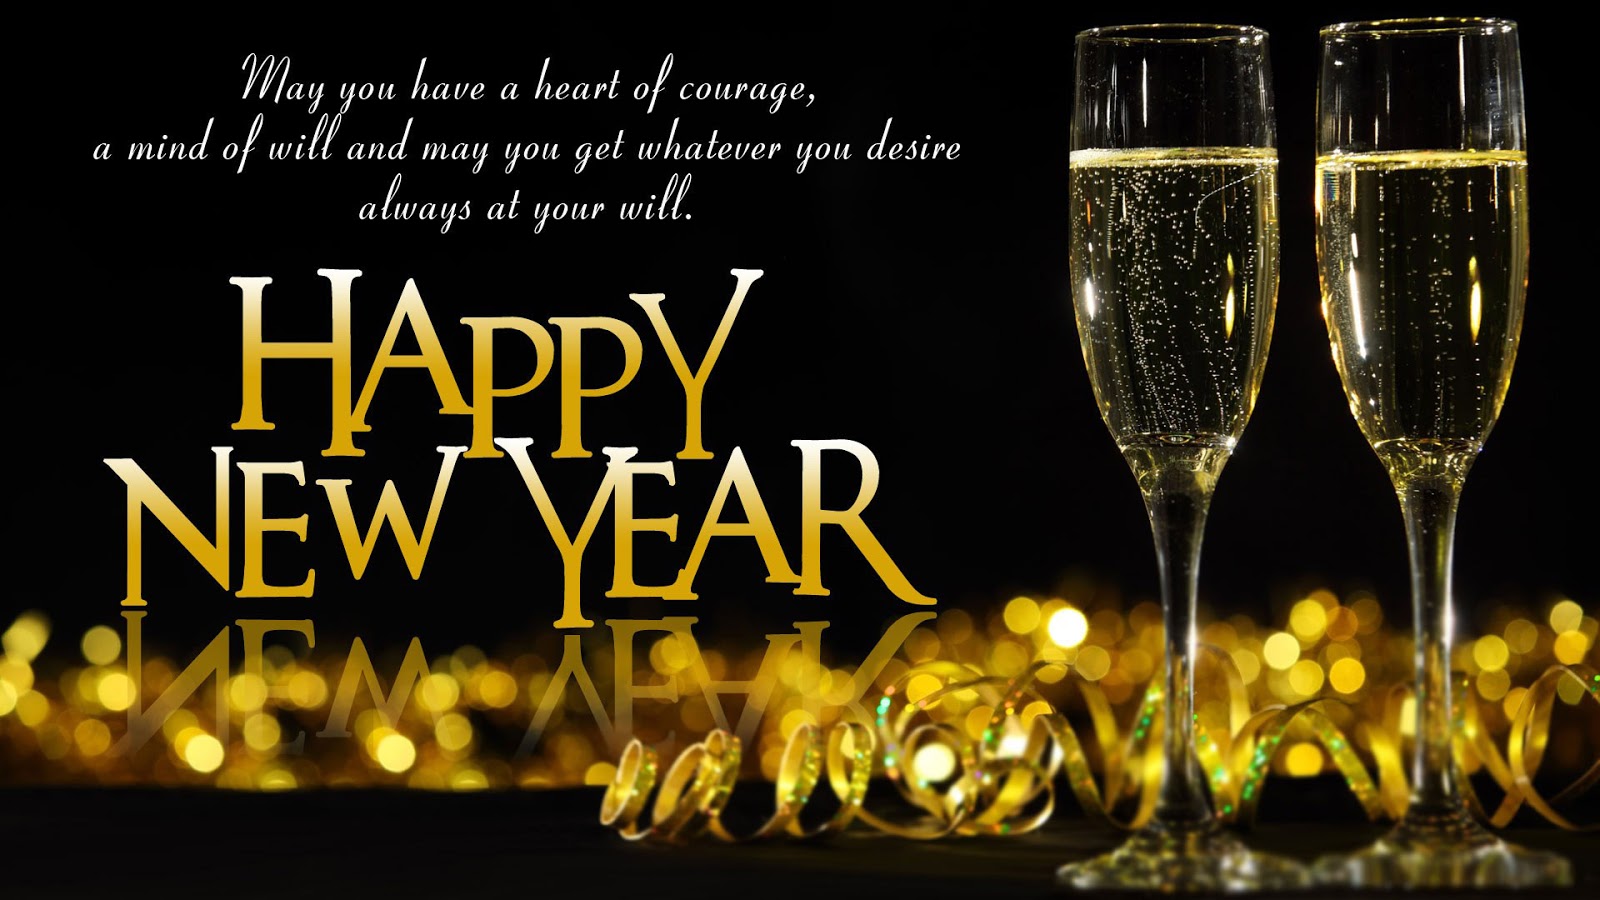 Happy new year 2015 sms for drink bear Desktop Best Wallpapers